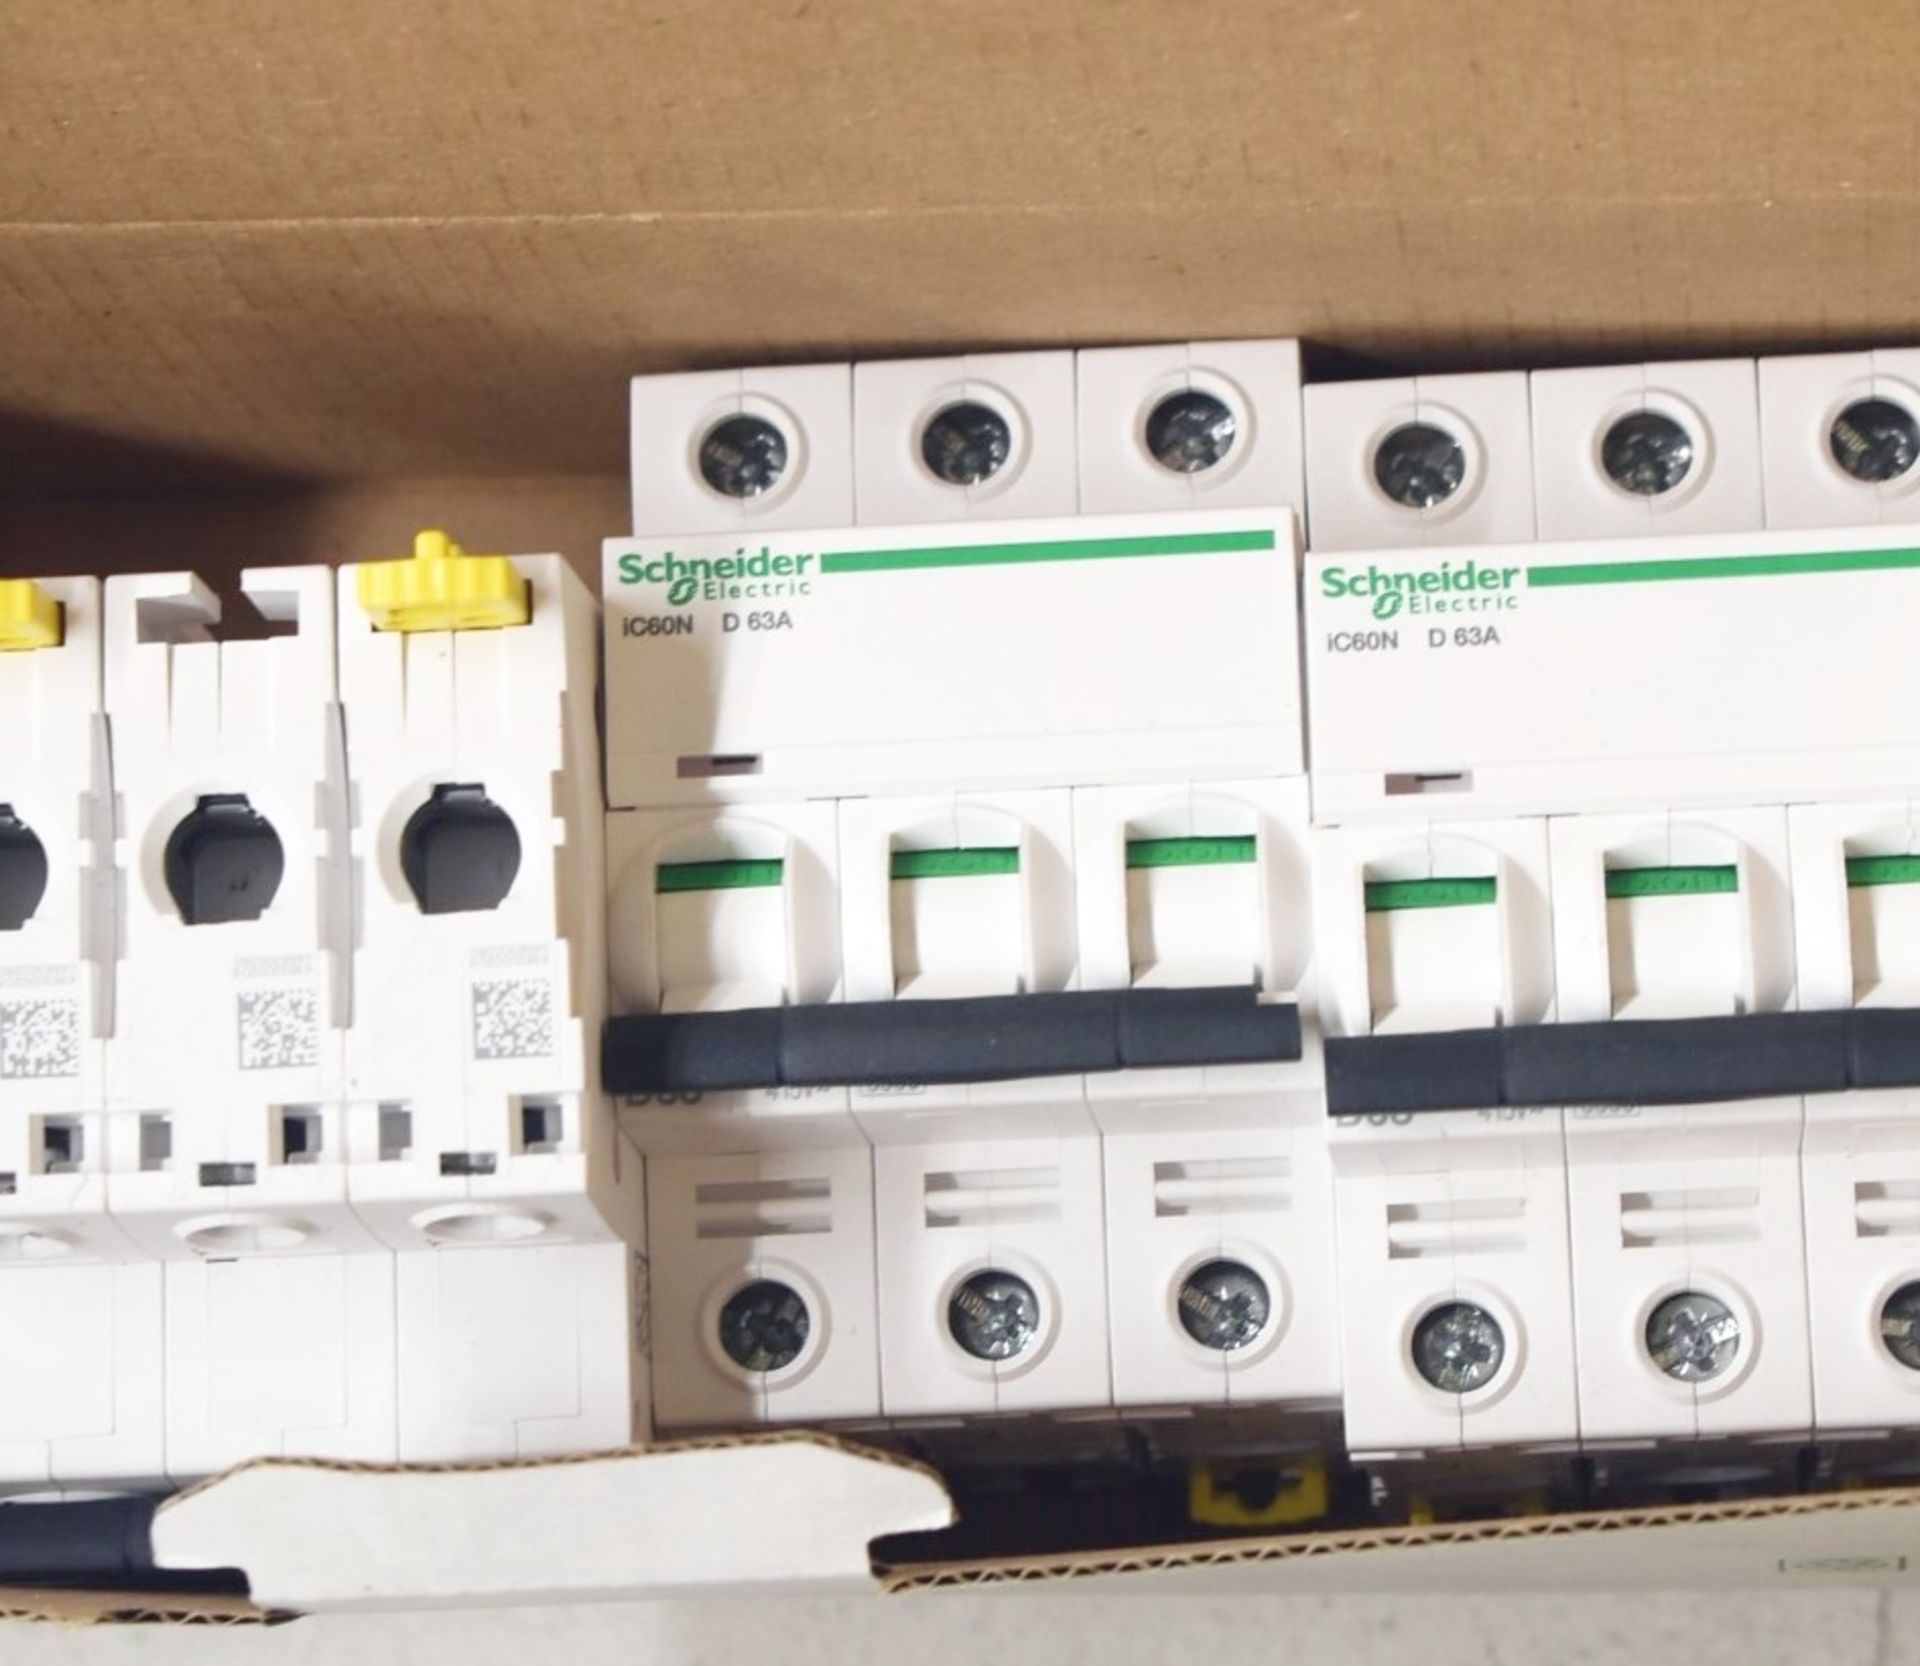 Approx 130 x Schneider Electric MCB Breakers - Various Types Included - iC60N, iC60H, C60N and More - Image 13 of 15